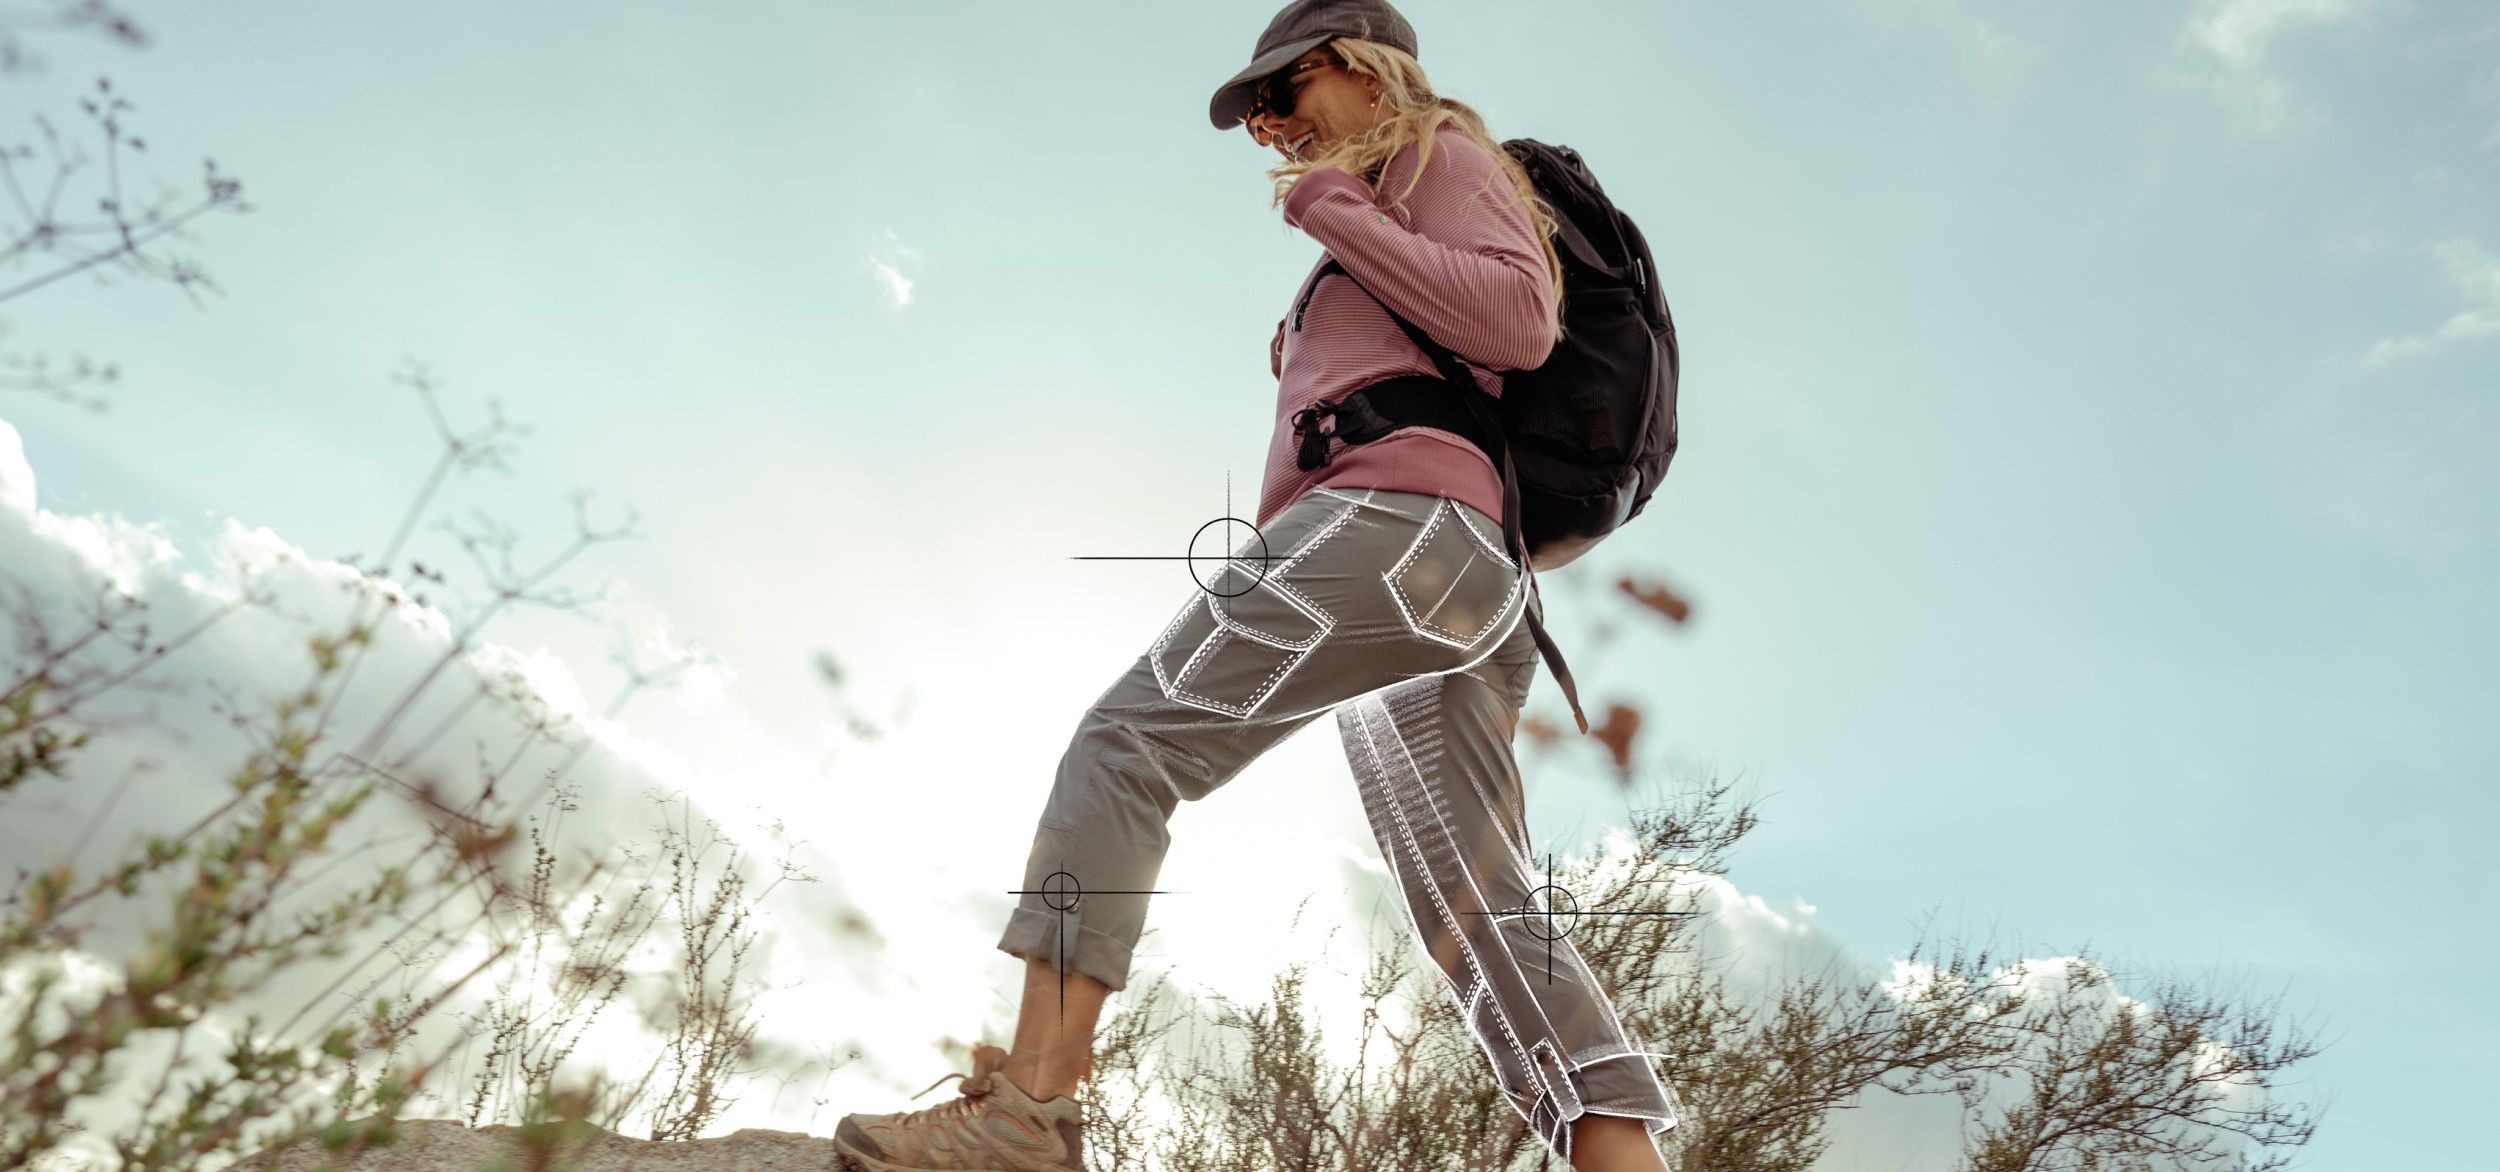 Shop Women's Best Selling Outdoor Clothing Styles